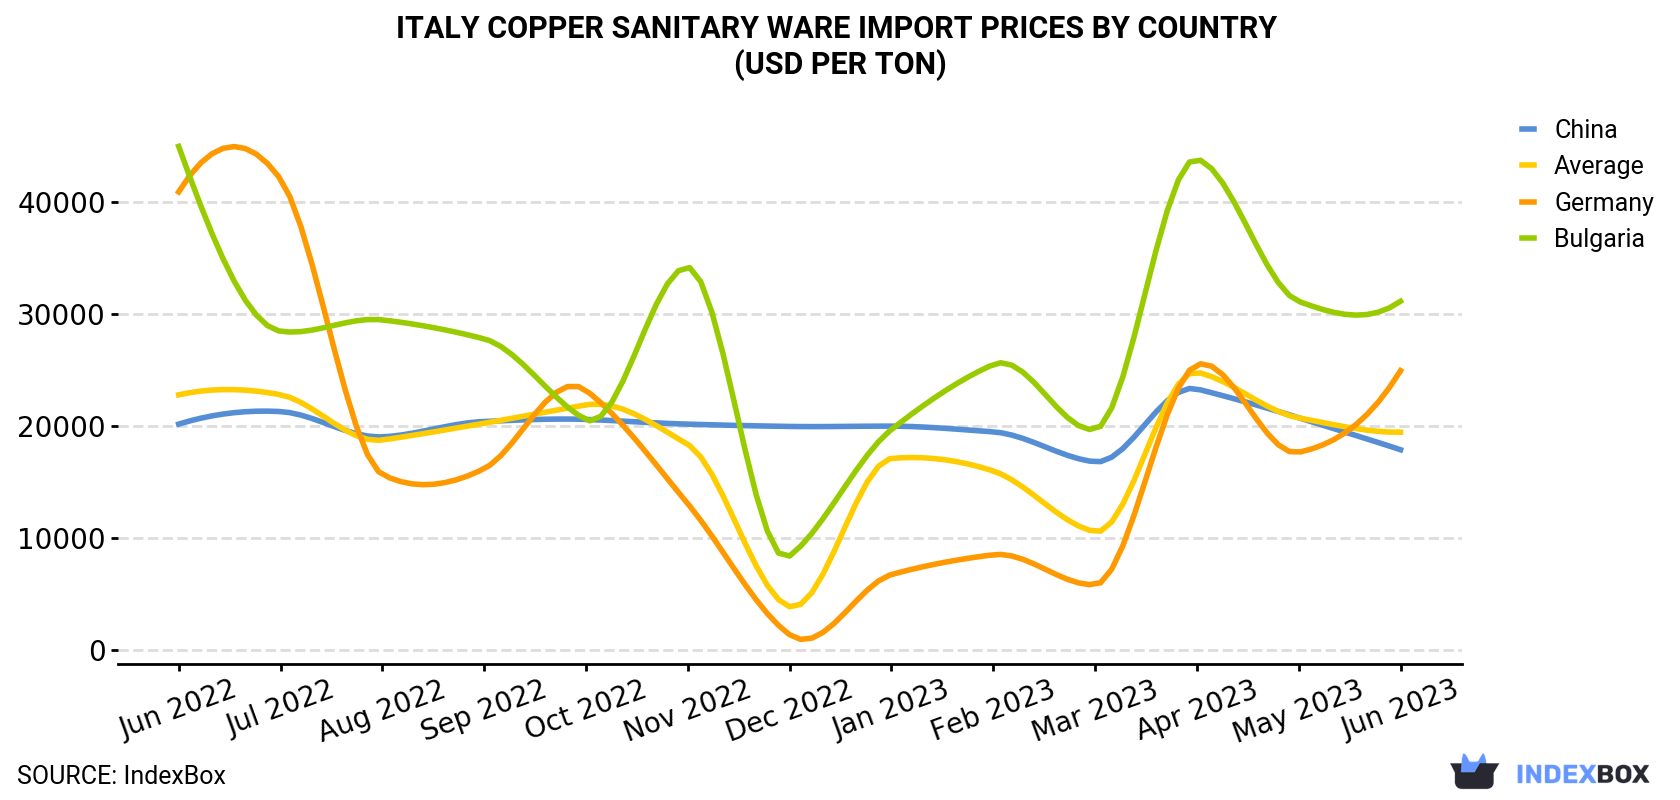 Italy Copper Sanitary Ware Import Prices By Country (USD Per Ton)